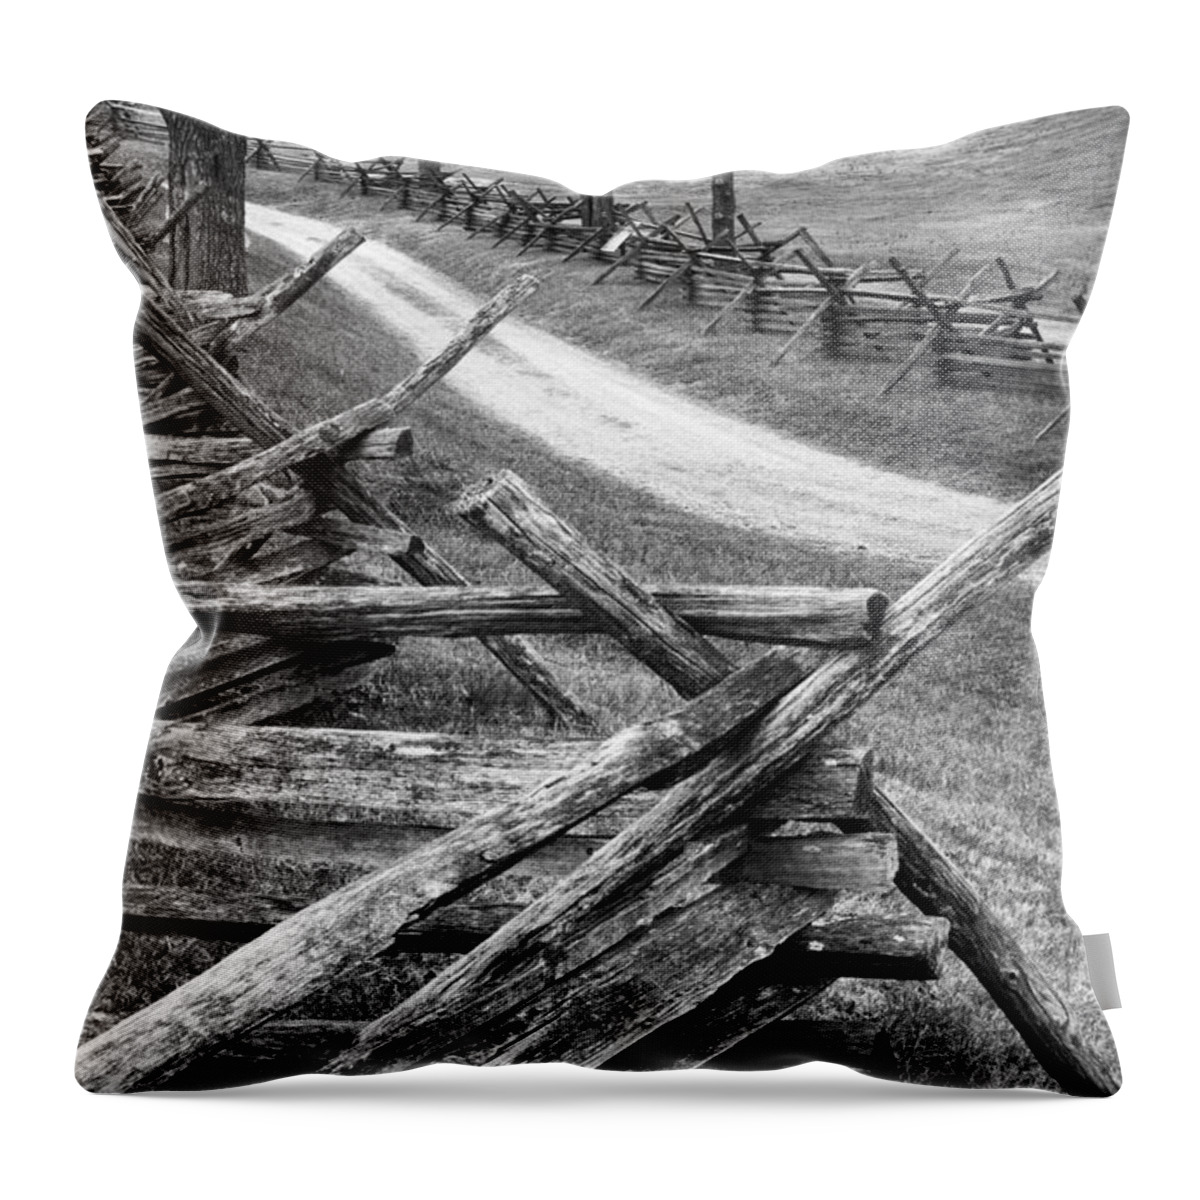 Antietam Throw Pillow featuring the photograph Sunken Road - BW by Paul W Faust - Impressions of Light